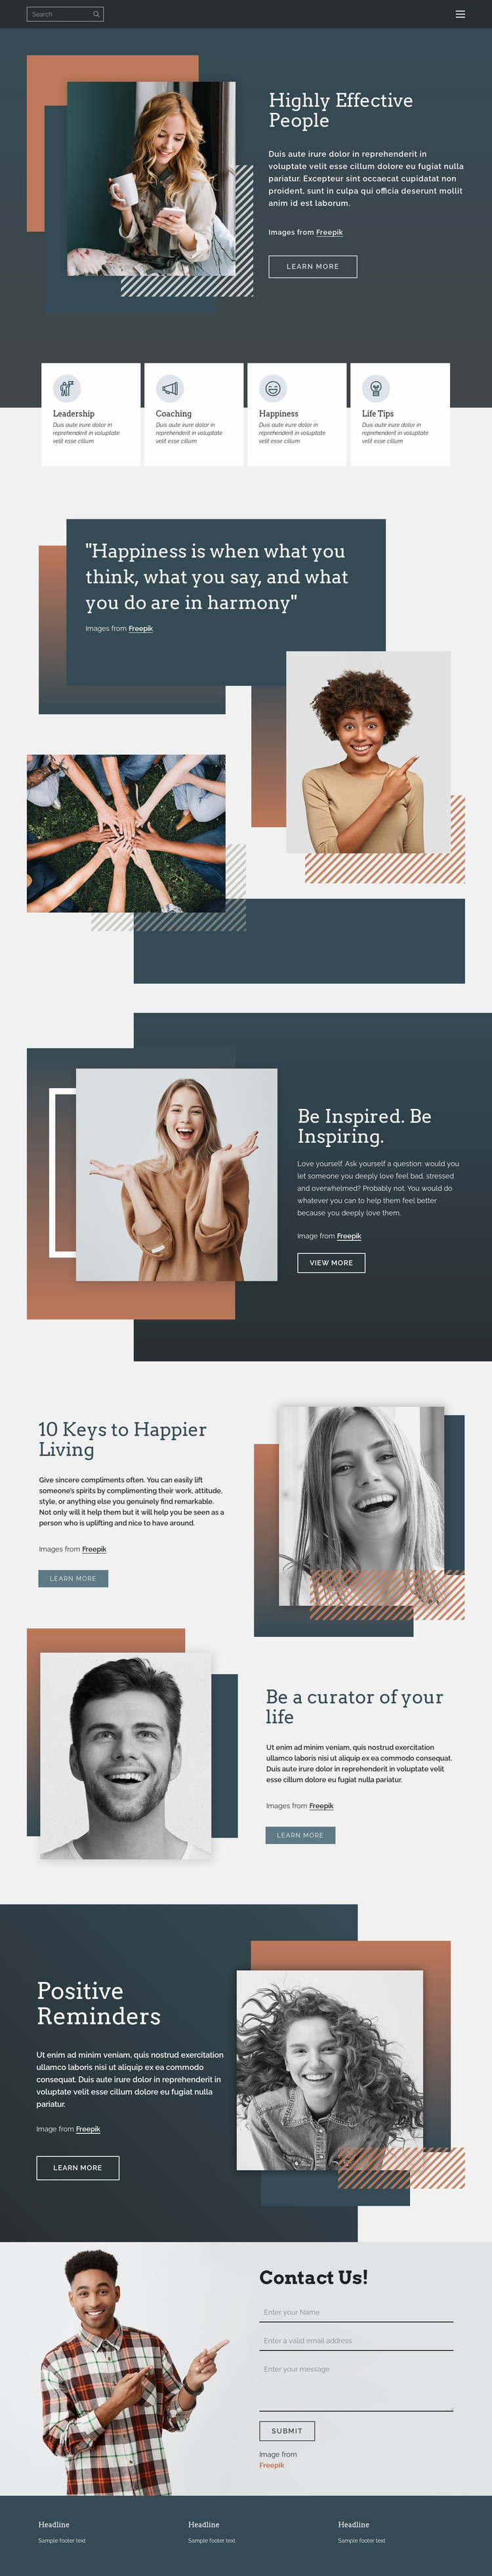 How to be successful in life Website Mockup